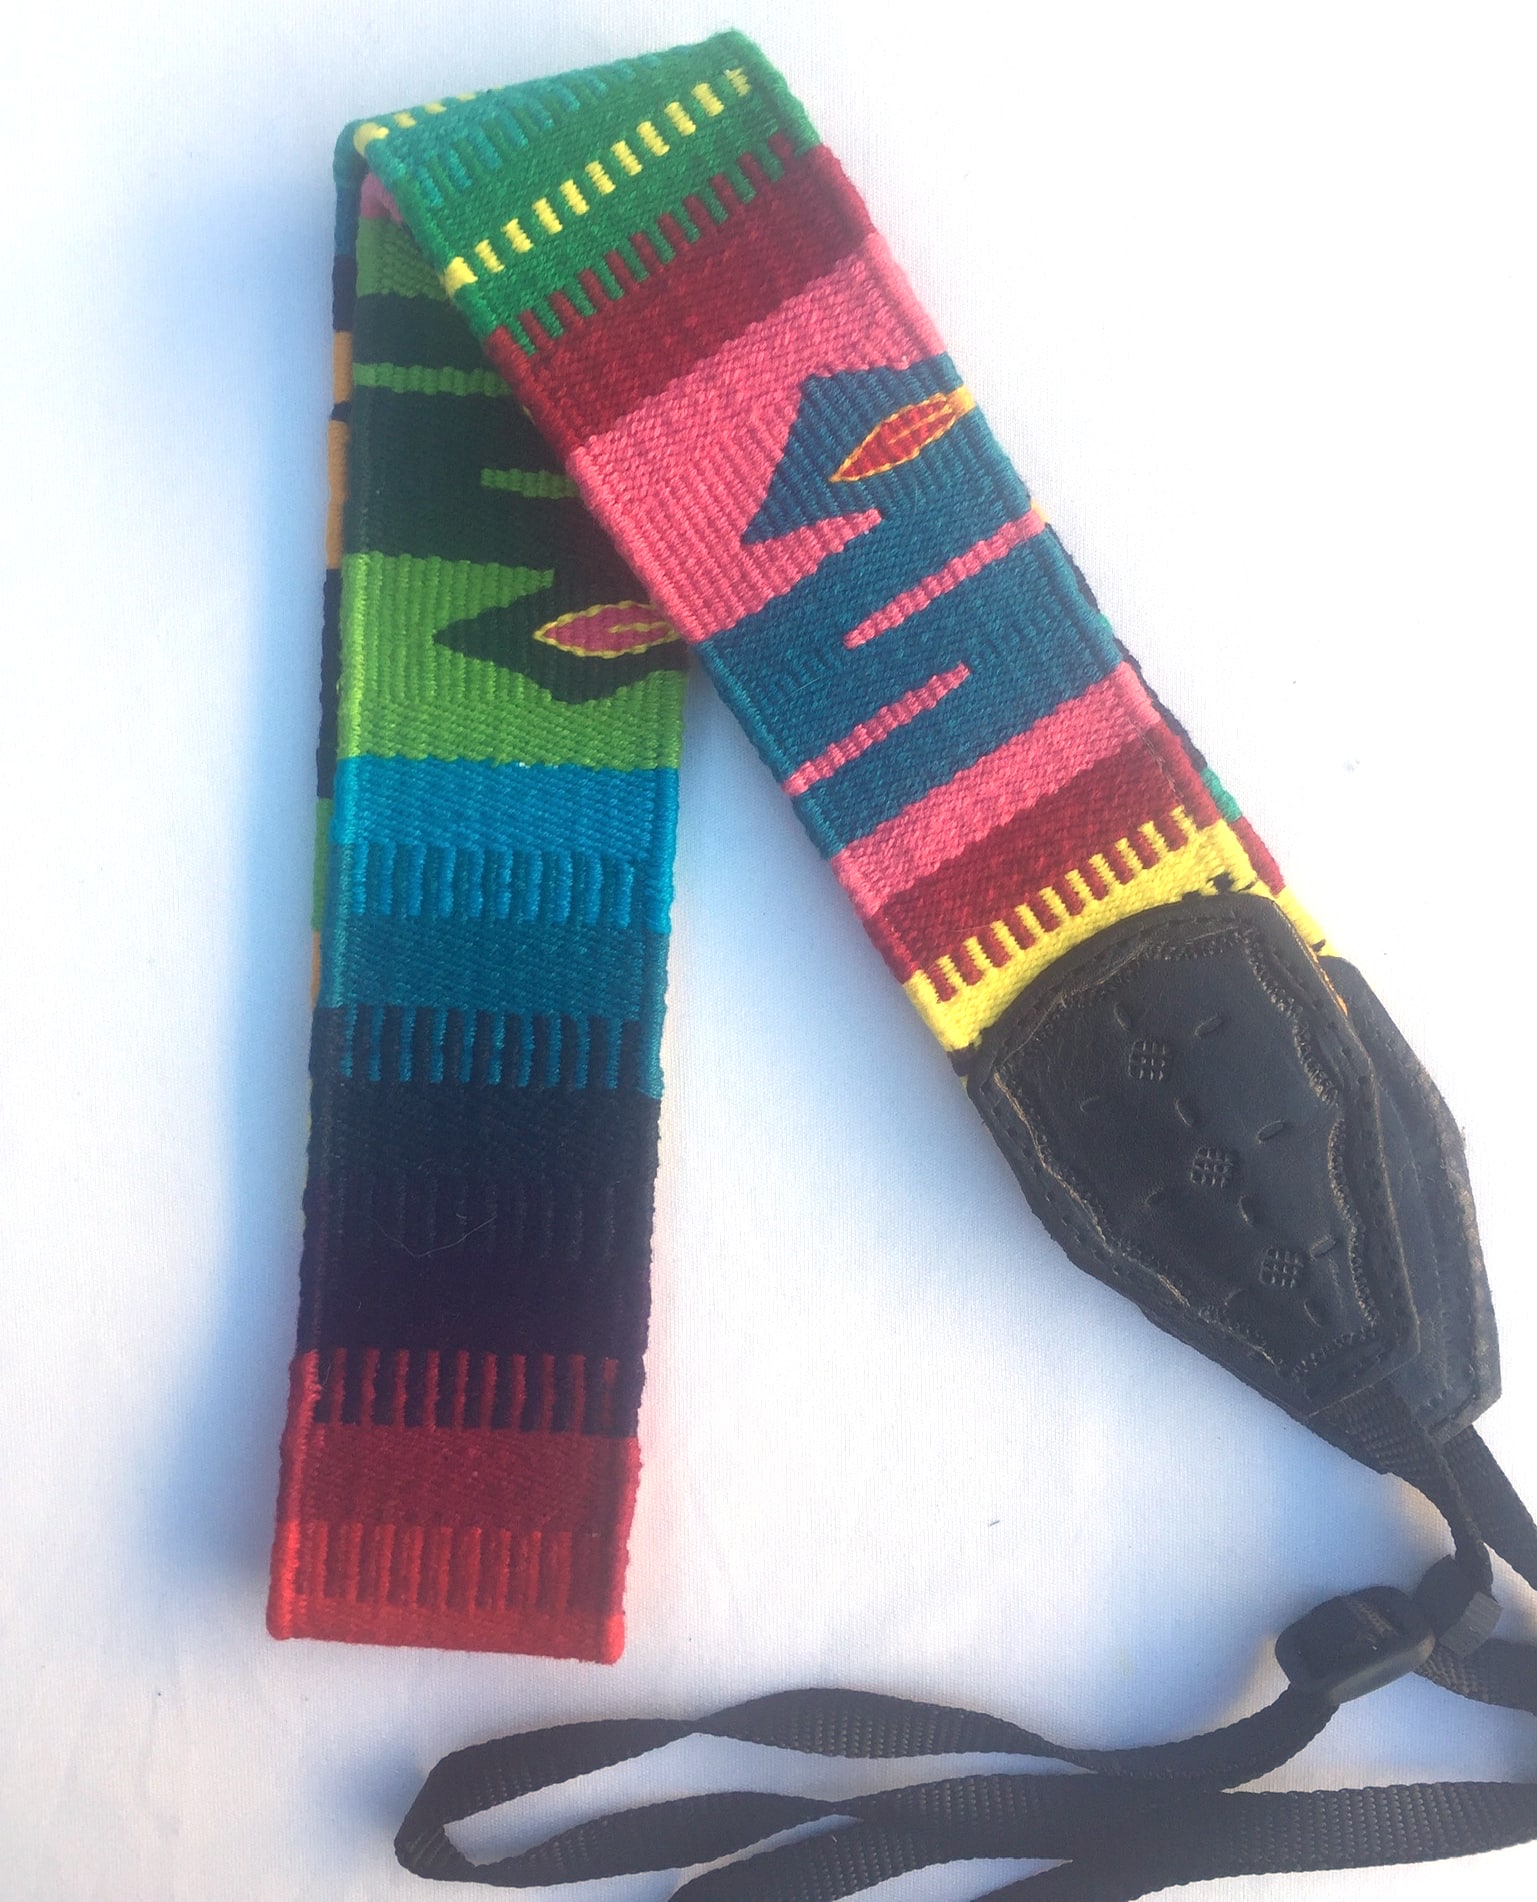 Handwoven Cotton and Leather Camera Strap - Brights with Serpent Design